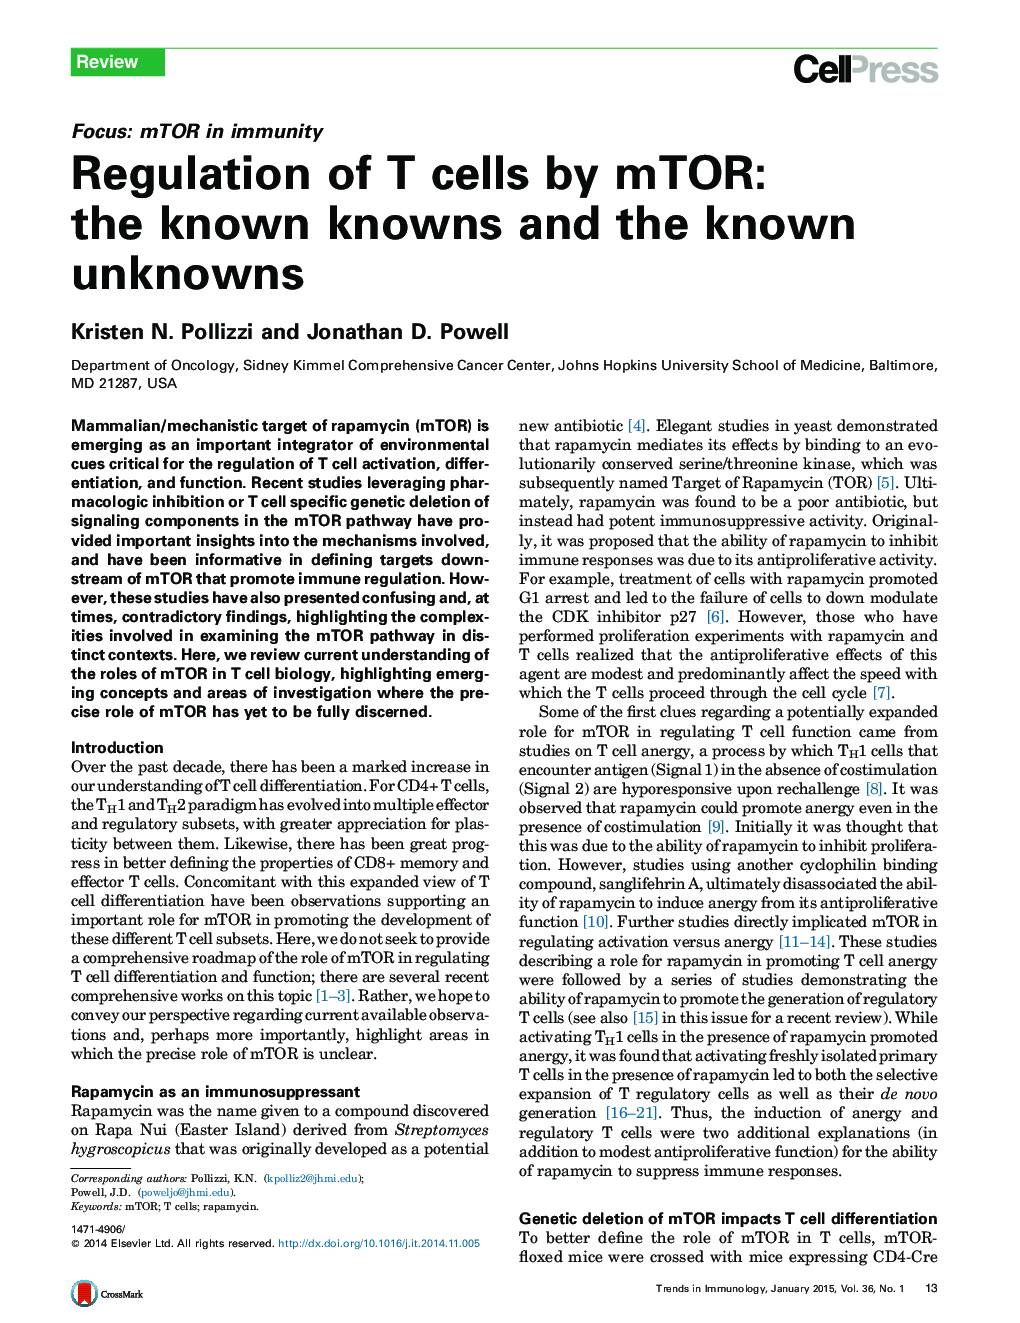 Regulation of T cells by mTOR: the known knowns and the known unknowns